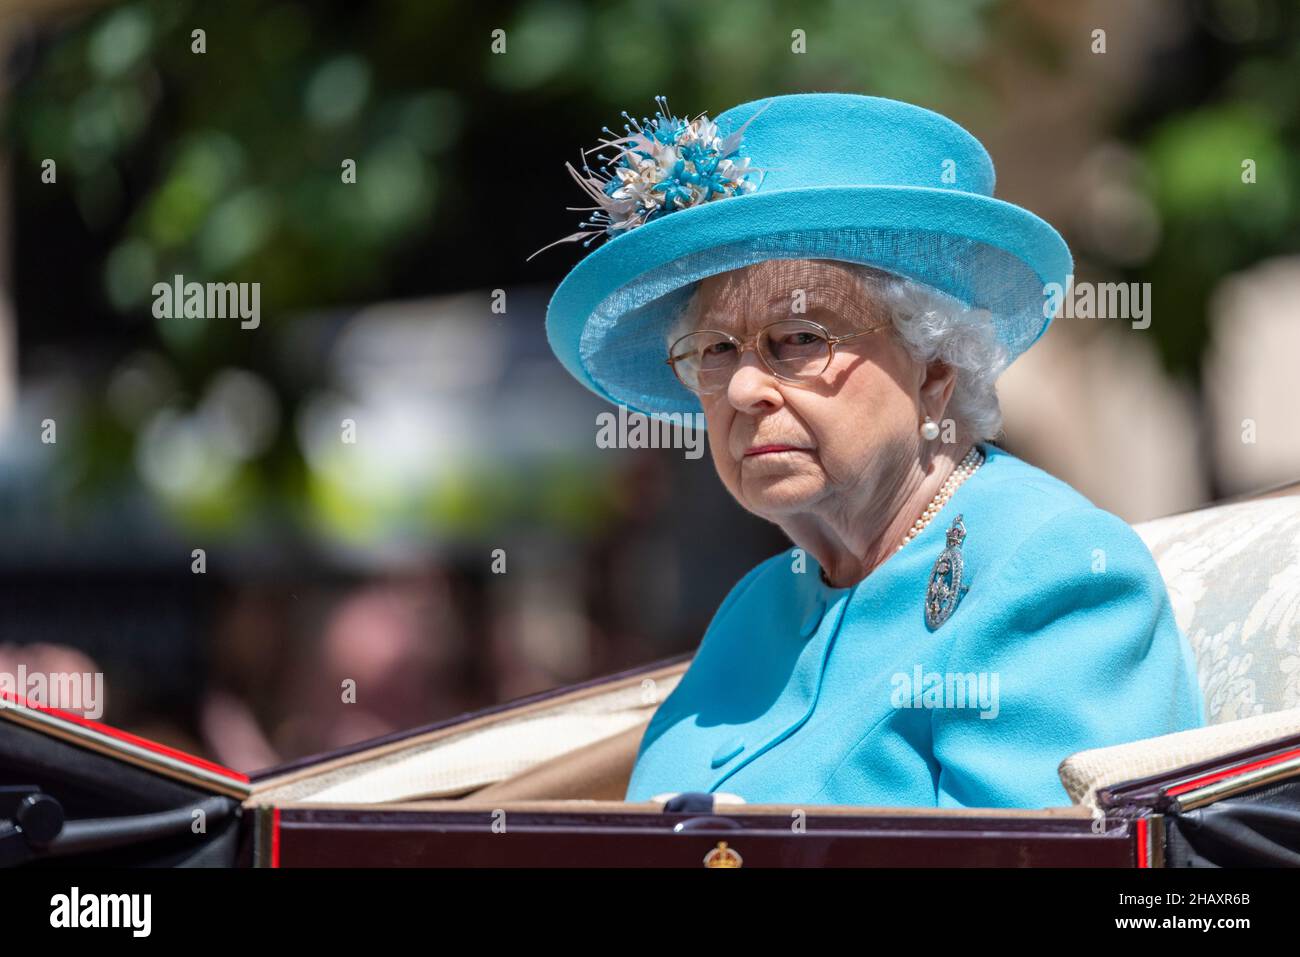 Queen Elizabeth II at Trooping the Colour 2018 in blue Angela Kelly design outfit. Alone in carriage with unhappy appearance Stock Photo